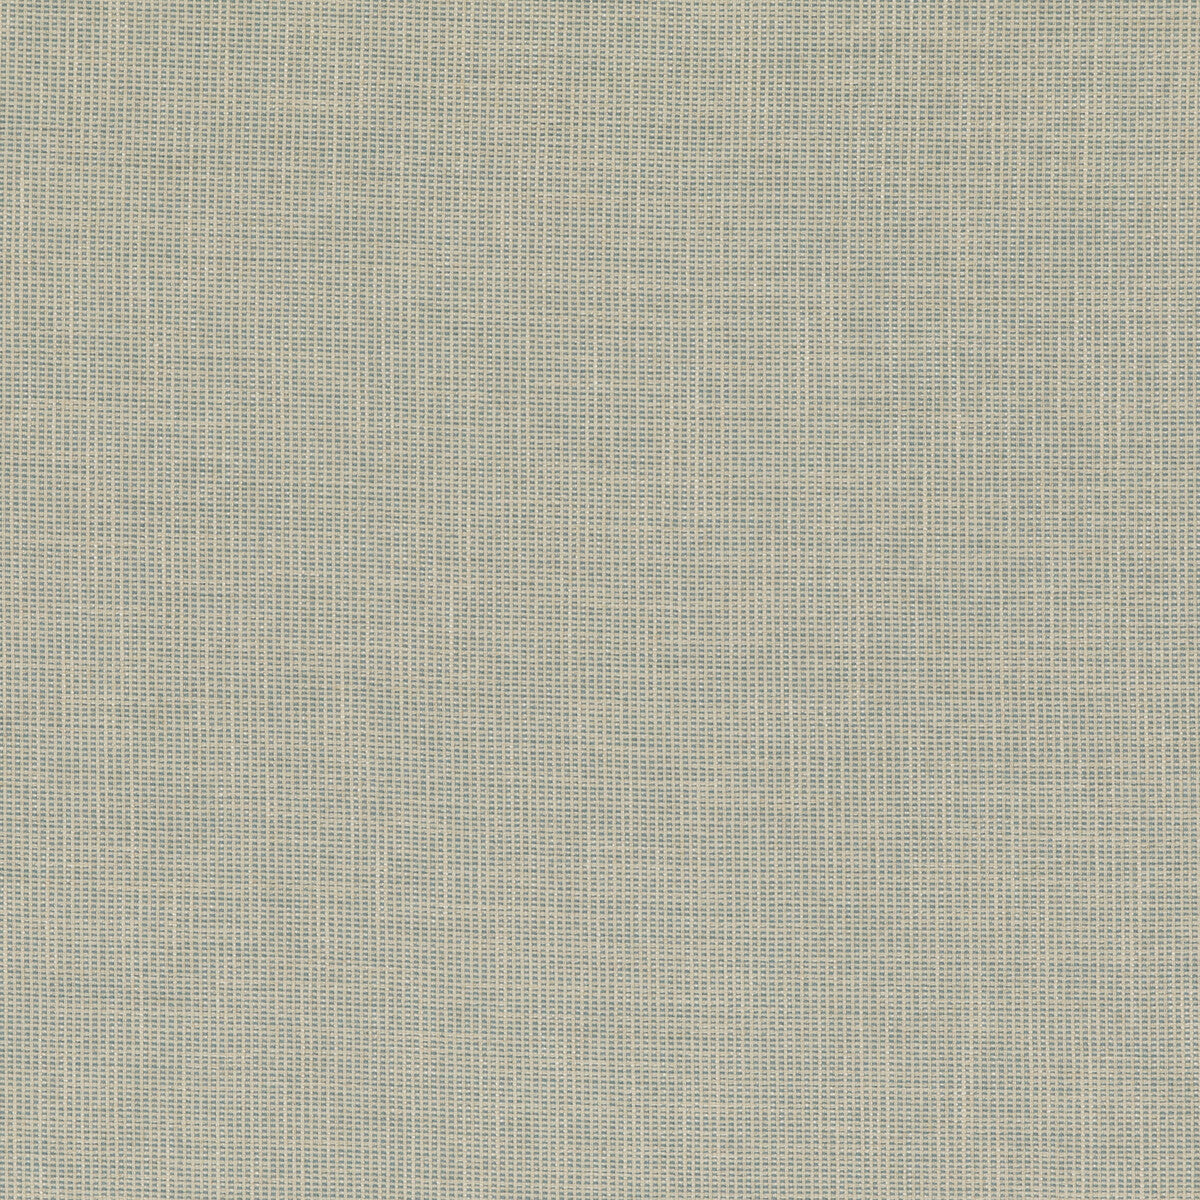 Folly fabric in soft blue color - pattern PF50487.605.0 - by Baker Lifestyle in the Block Party collection